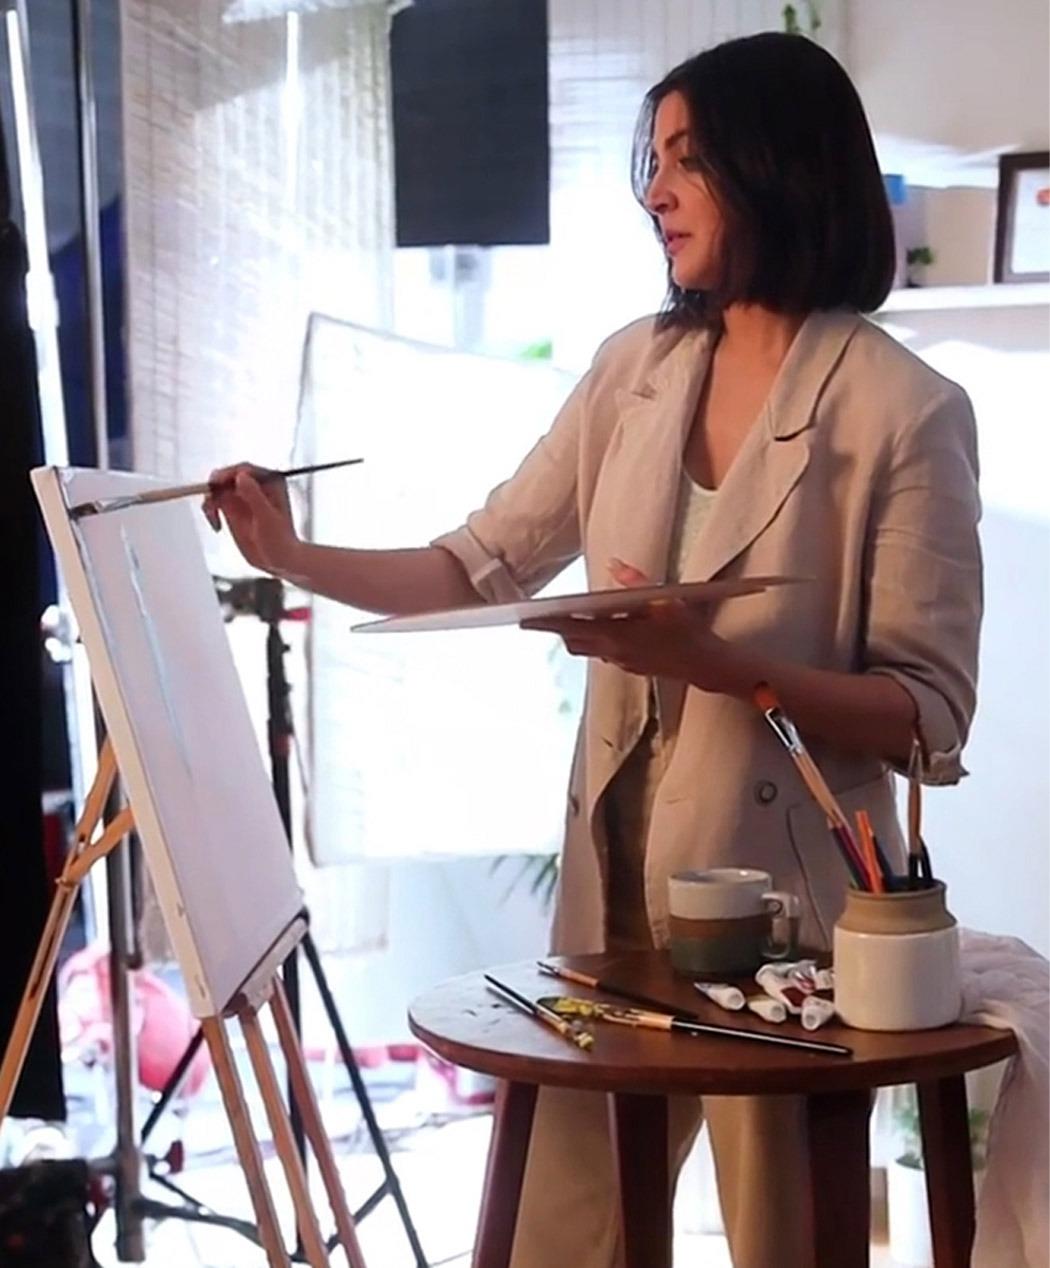 Watch: Anushka Sharma gets to paint at work and she knows what a masterpiece looks like